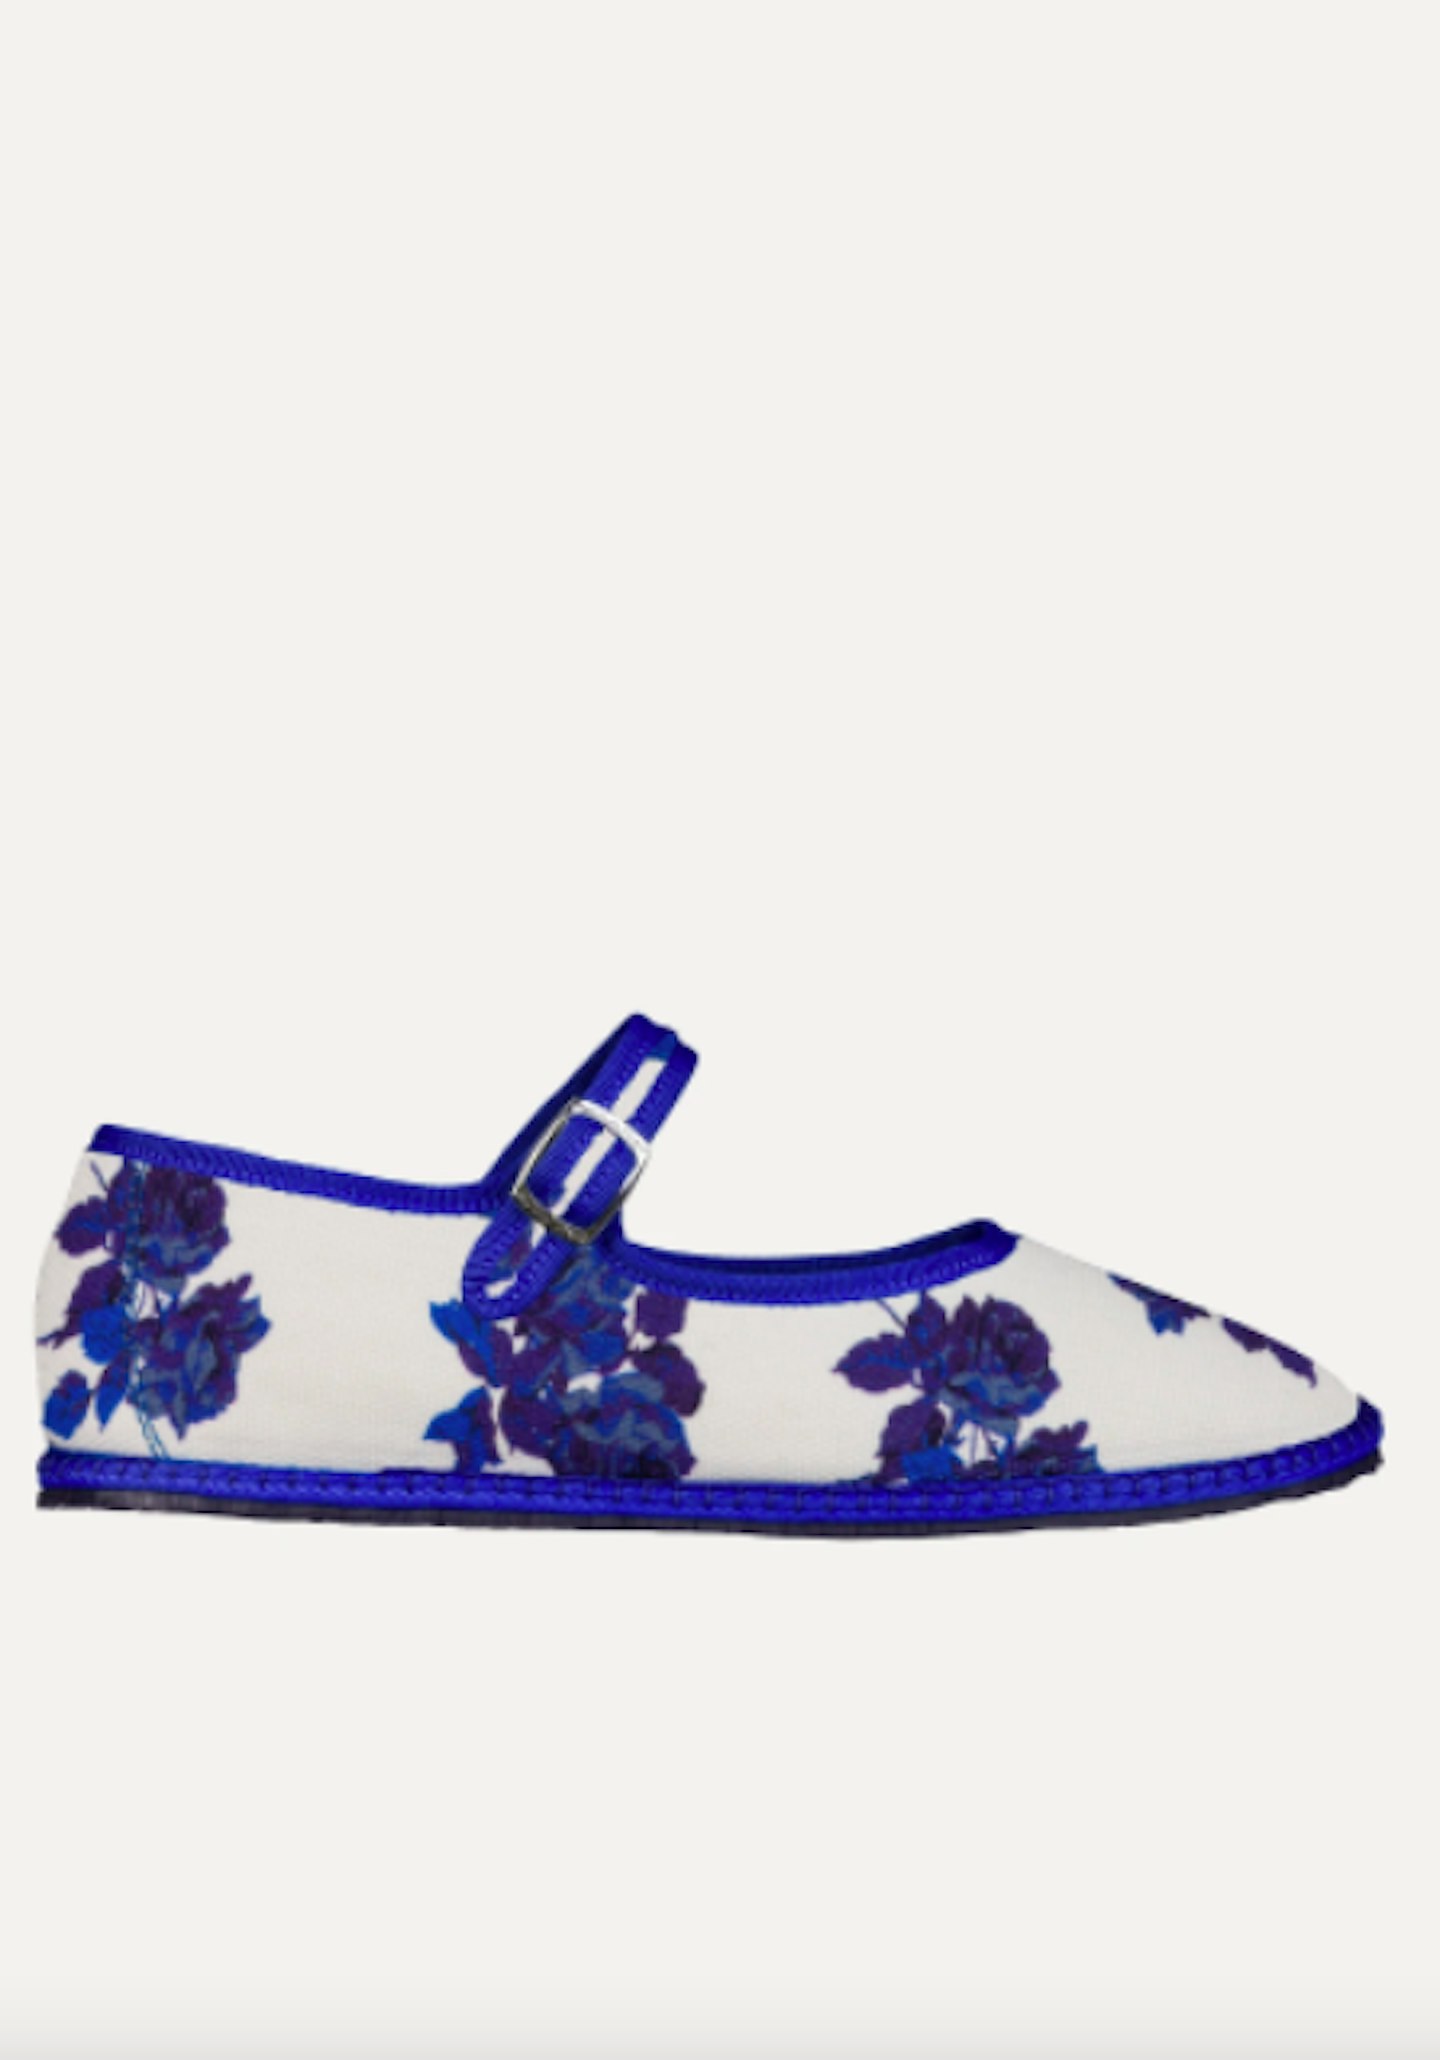 Blue Floral Mary-Jane Shoes, £140